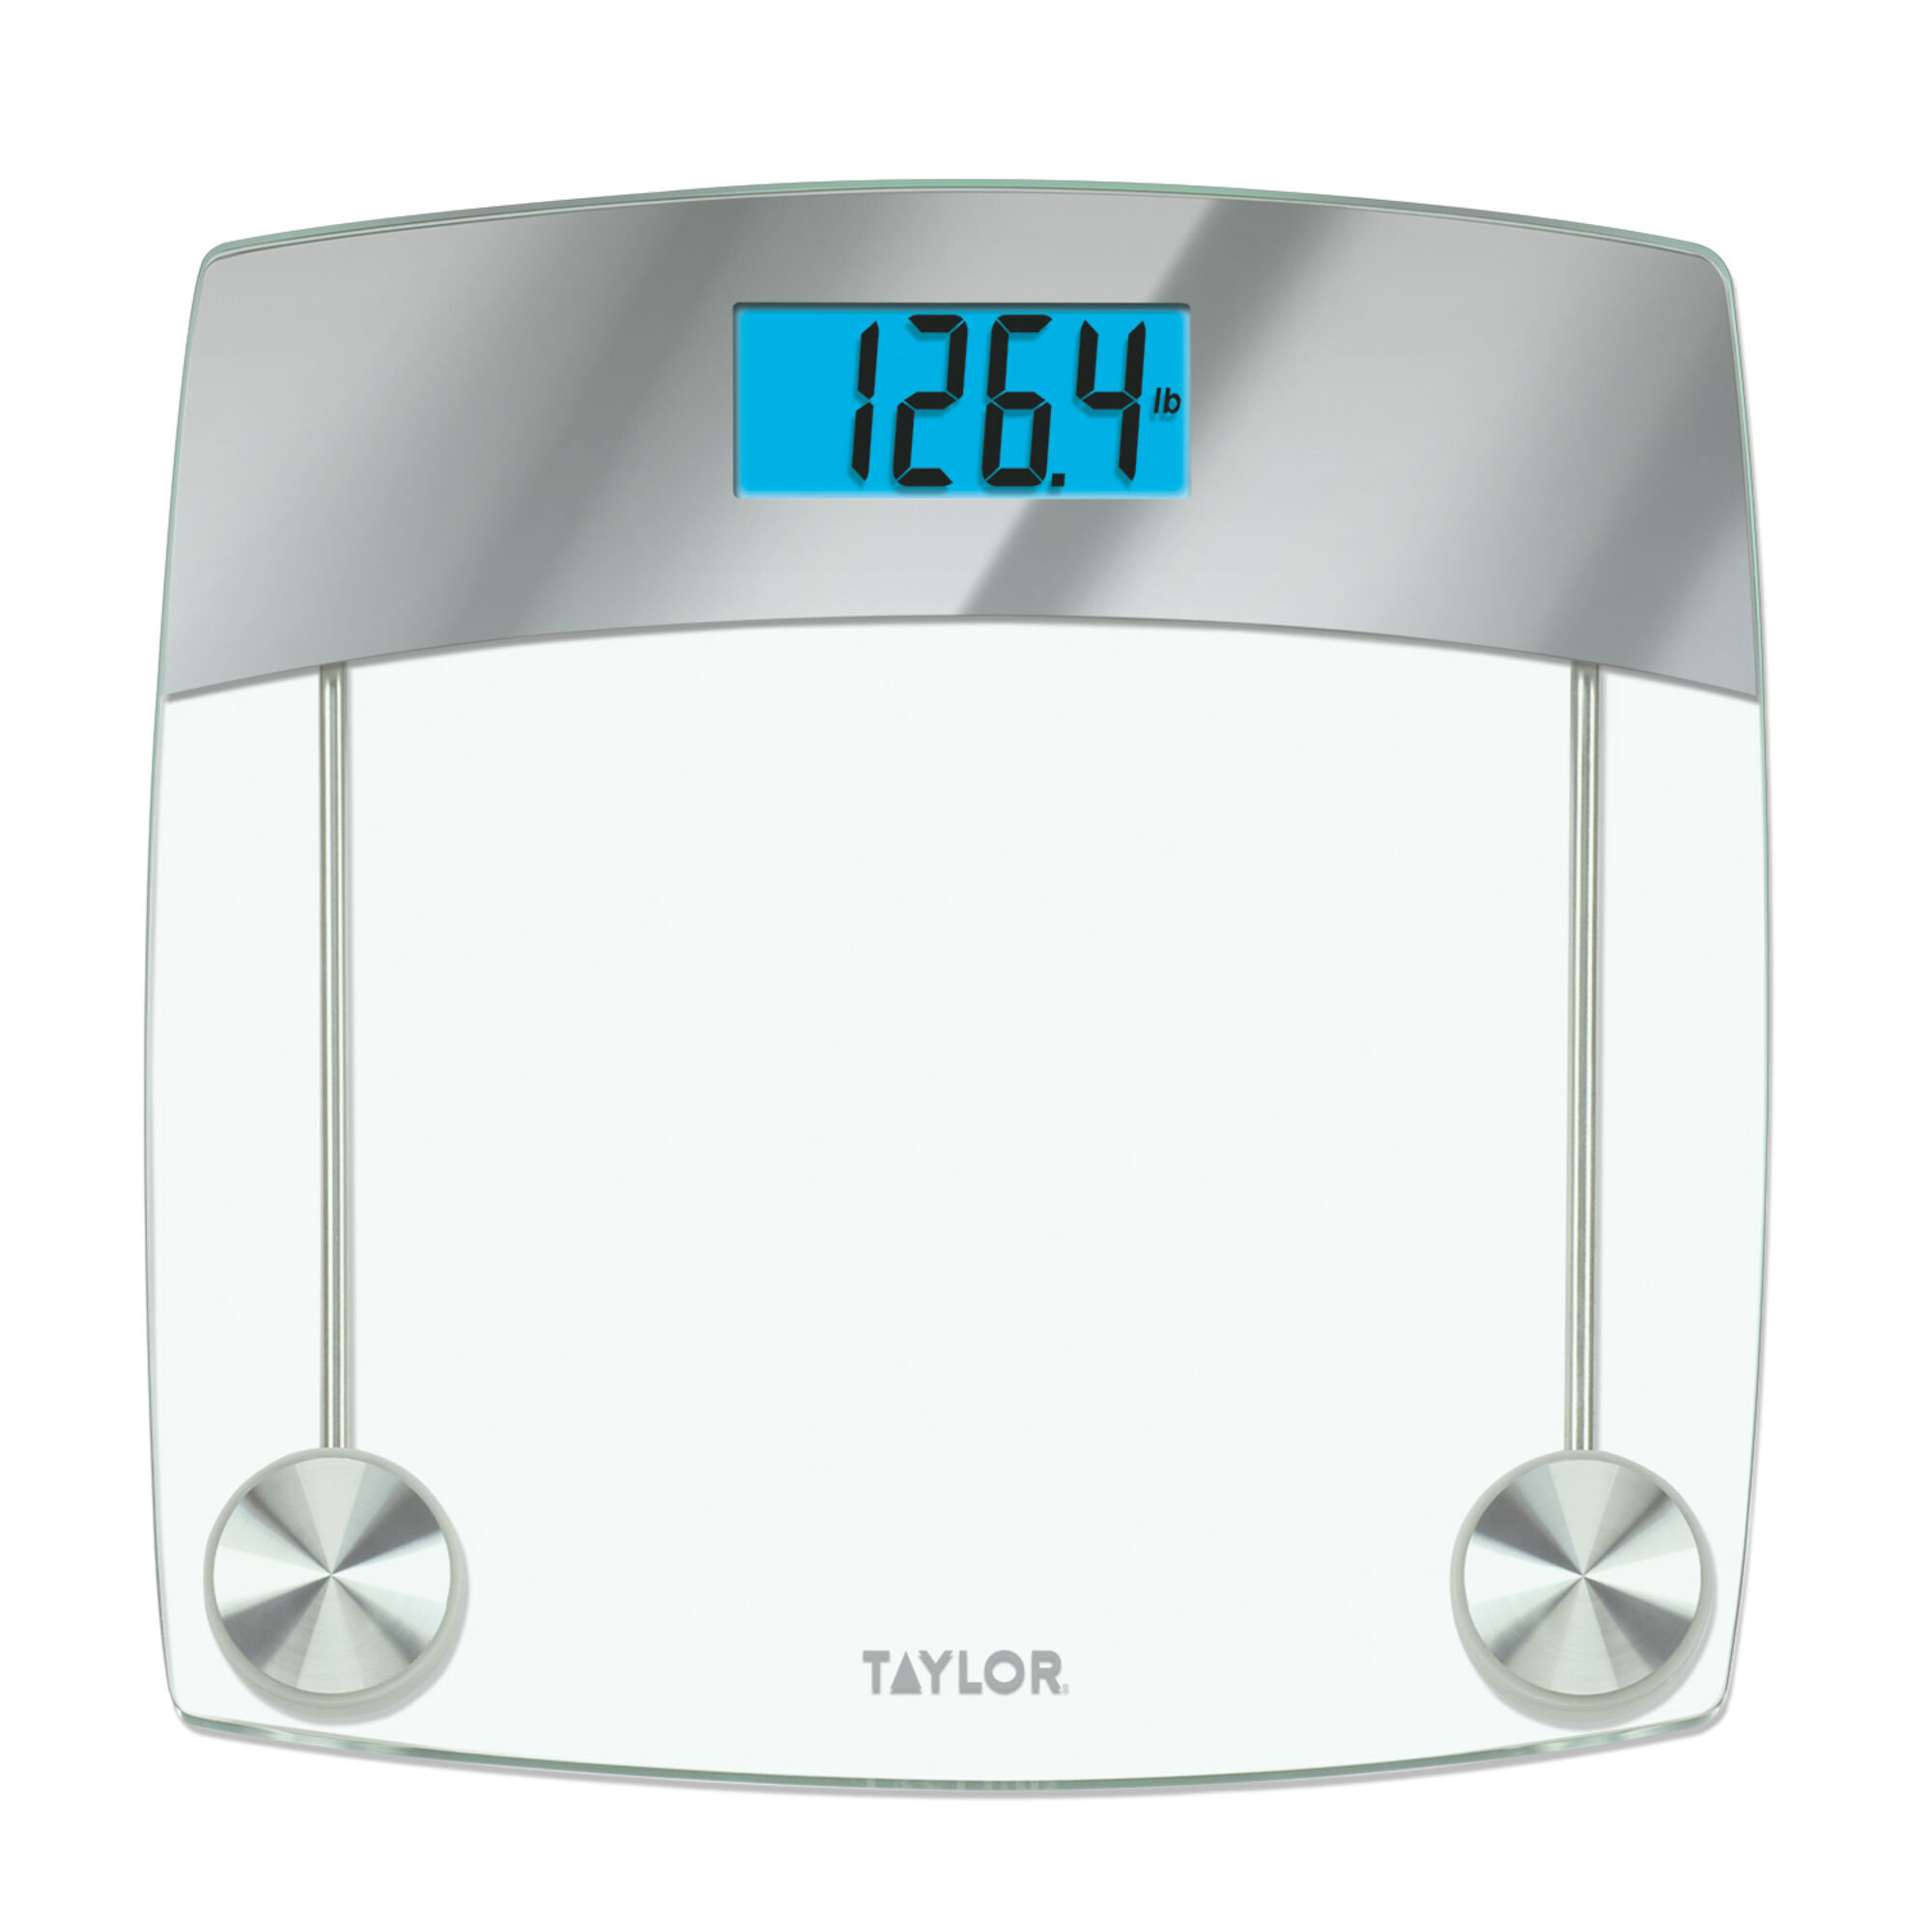 Digital Body Weight Bathroom Scale - Step-On Weighing Machine - Accurate  Measurement by Bluestone